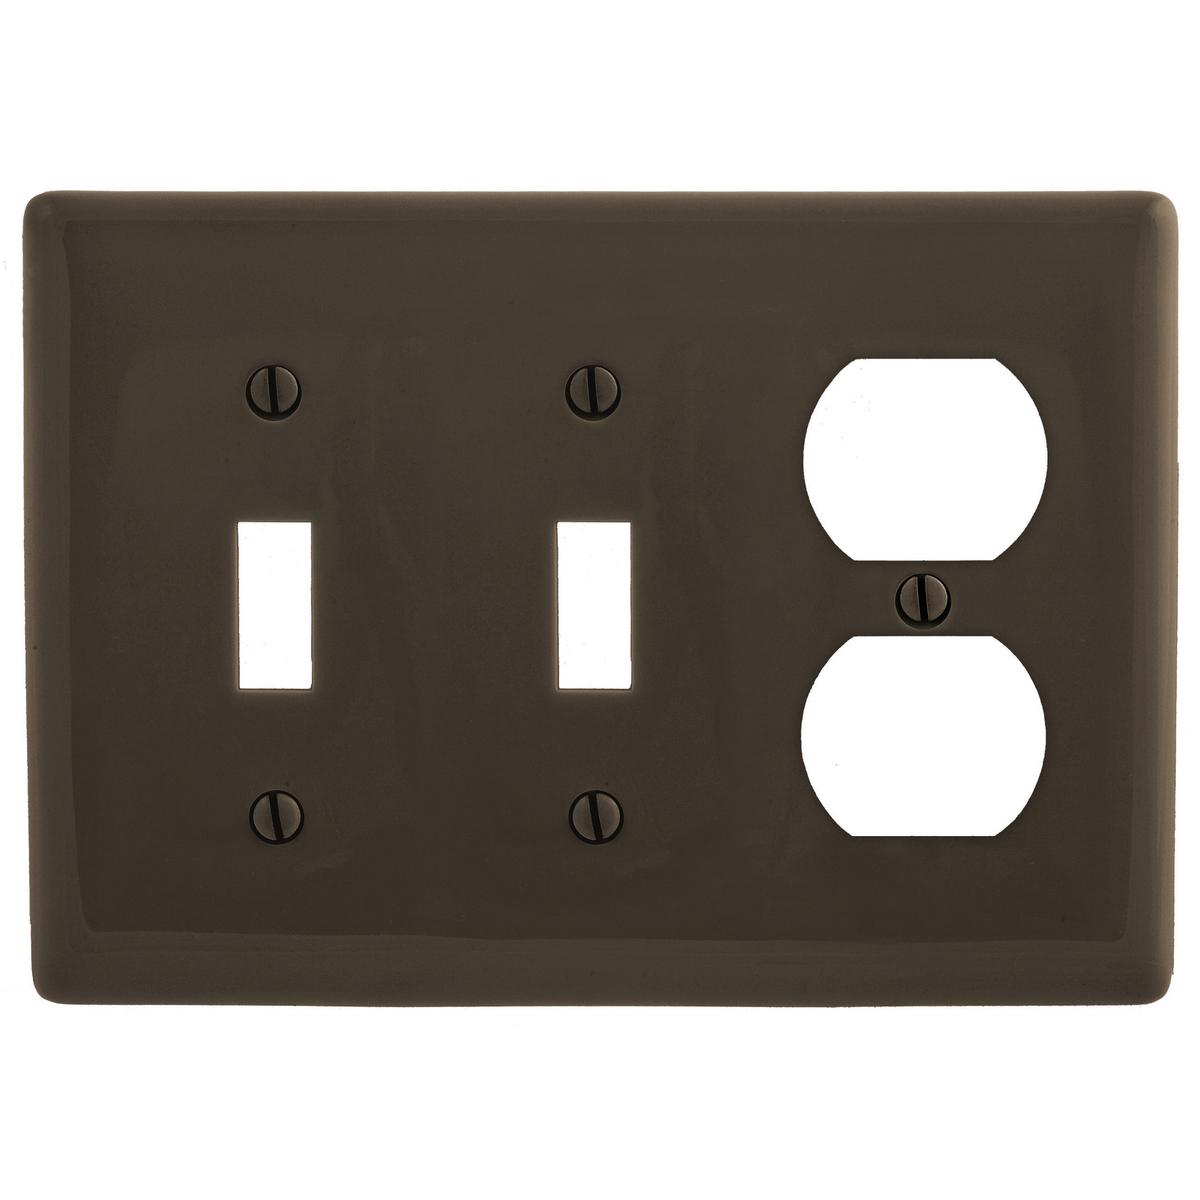 Hubbell NPJ28 Wallplates, Nylon, Mid-Sized, 3-Gang, 2) Toggle, 1) Duplex, Brown  ; Reinforcement ribs for extra strength ; High-impact, self-extinguishing nylon material ; Captive screw feature holds mounting screw in place ; Standard Size is 1/8" larger to give you ex